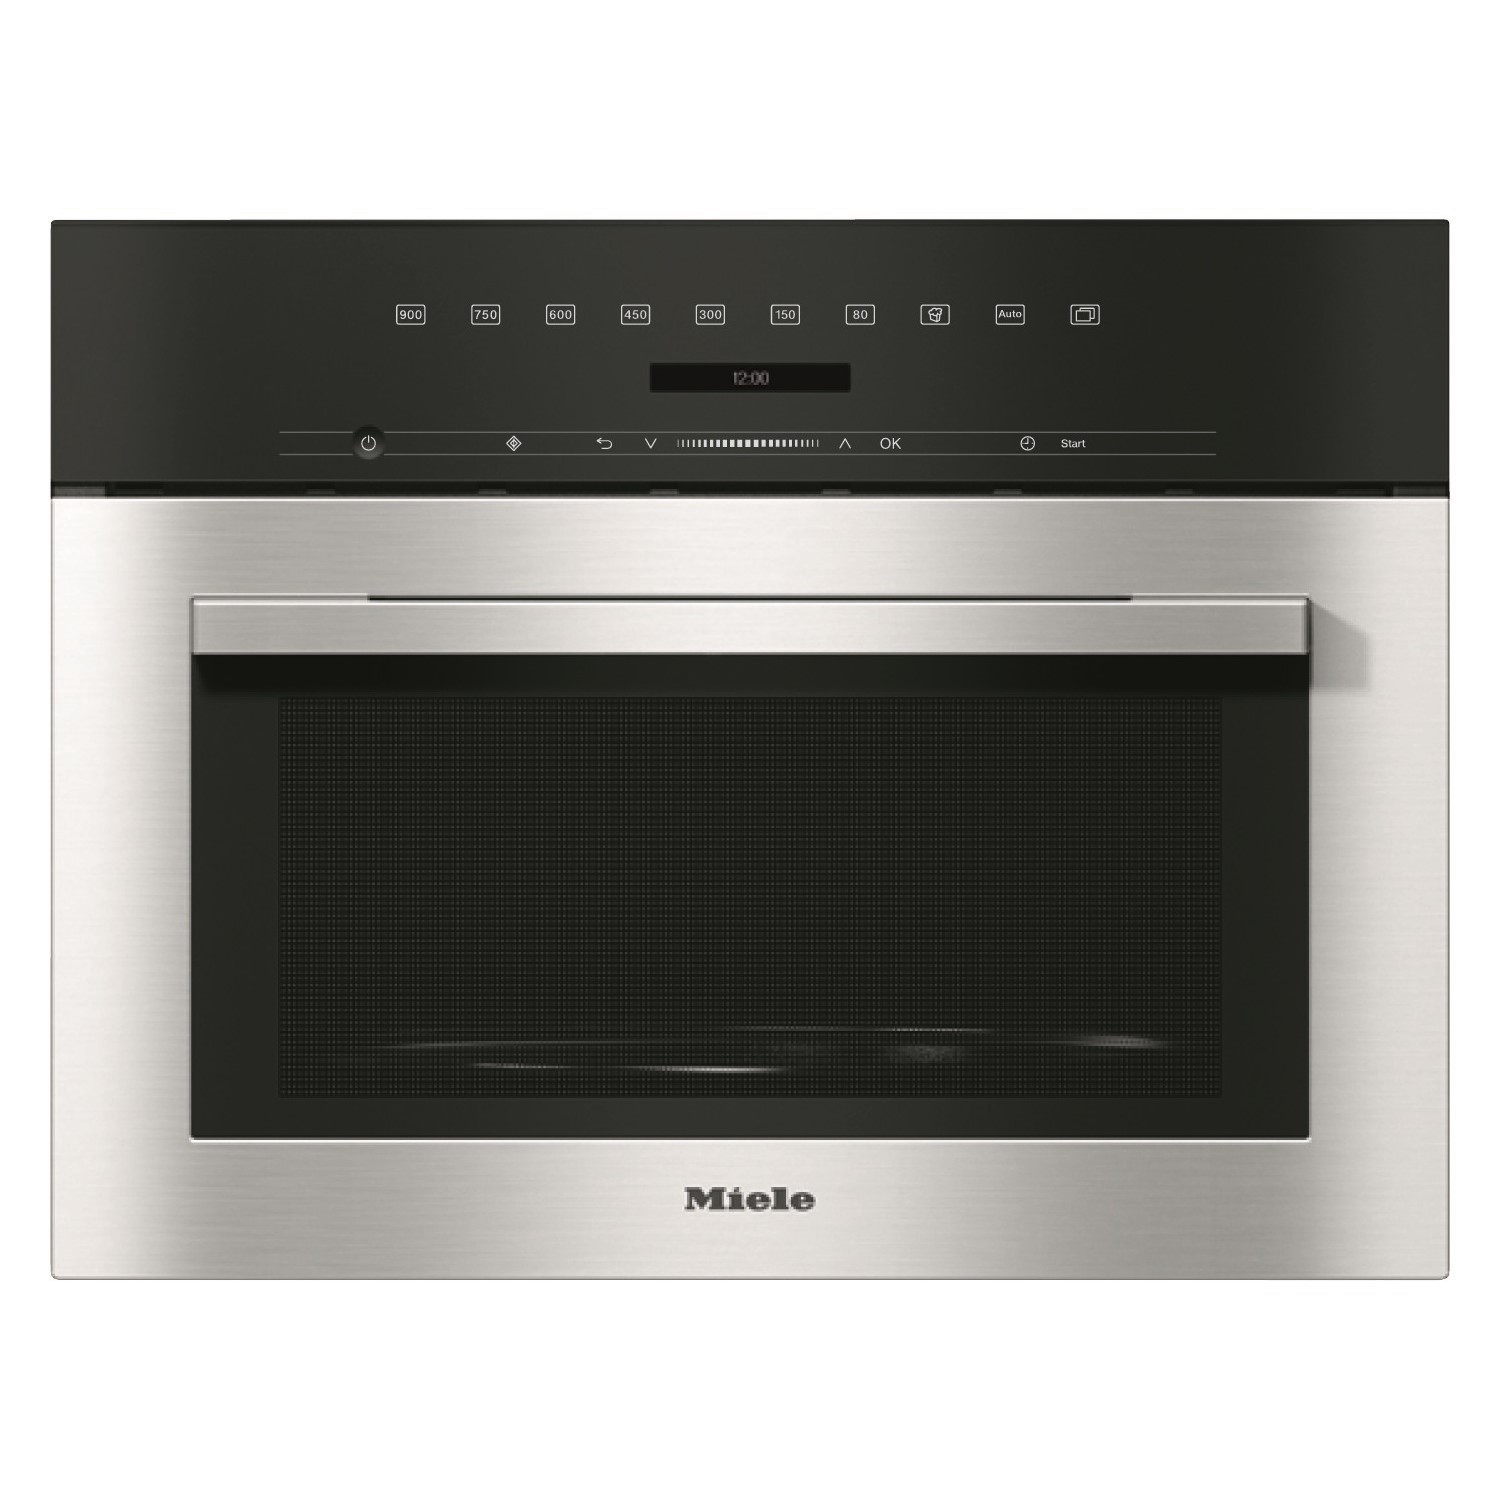 Miele 26L 900W Touch Control Built-in Microwave - Clean Steel